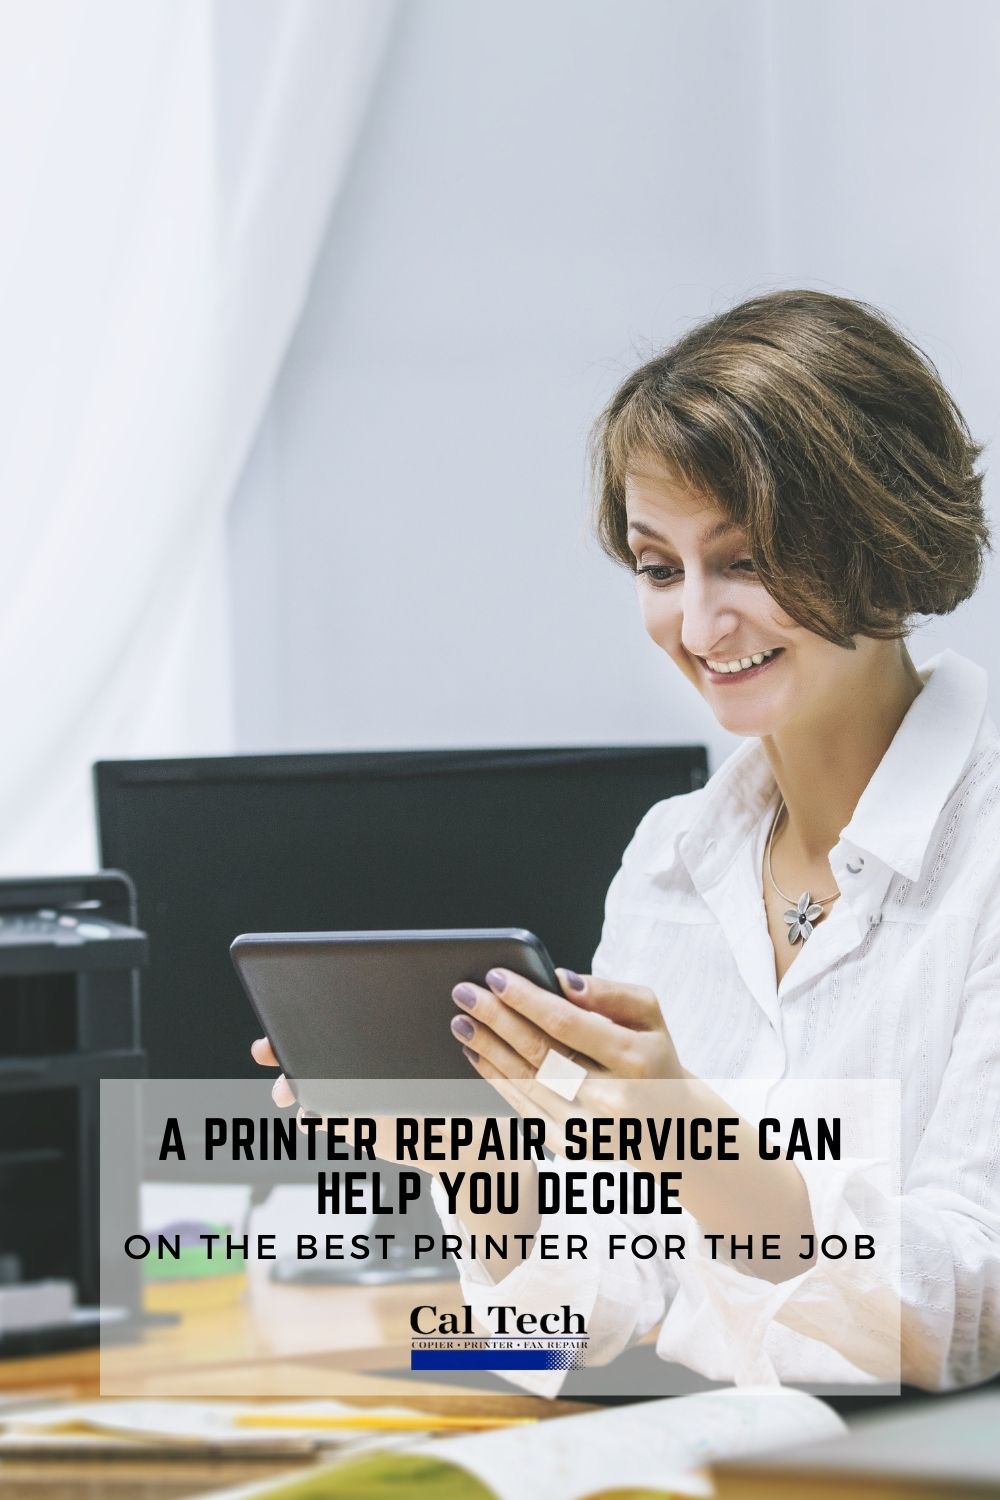 Hire-a-Printer-Repair-Service-to-Maintain-Your-Office-Equipment-pinterest